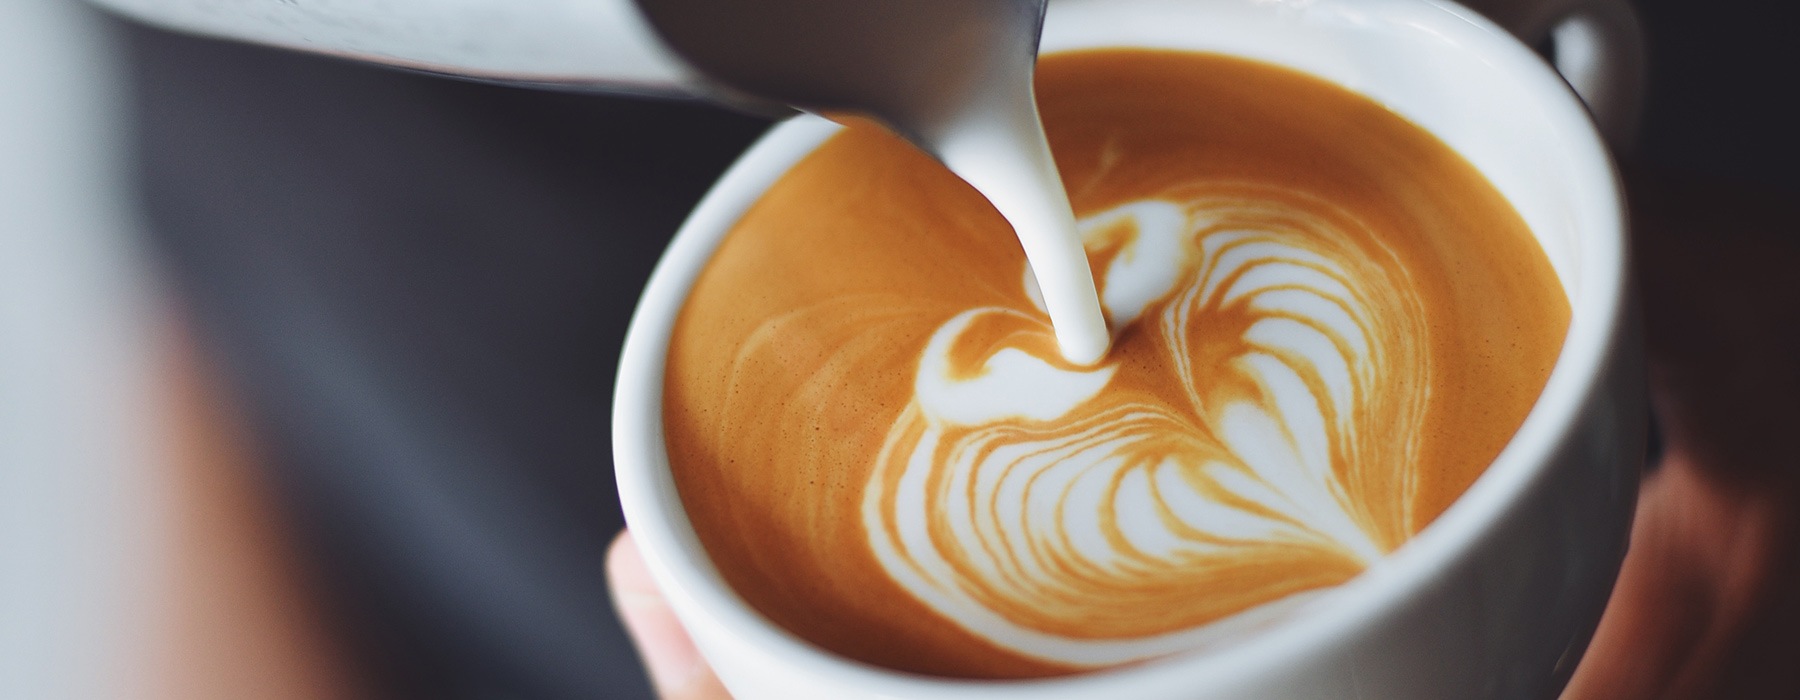 close-up image of cream being poured into latte art on the top of a hot coffee drink